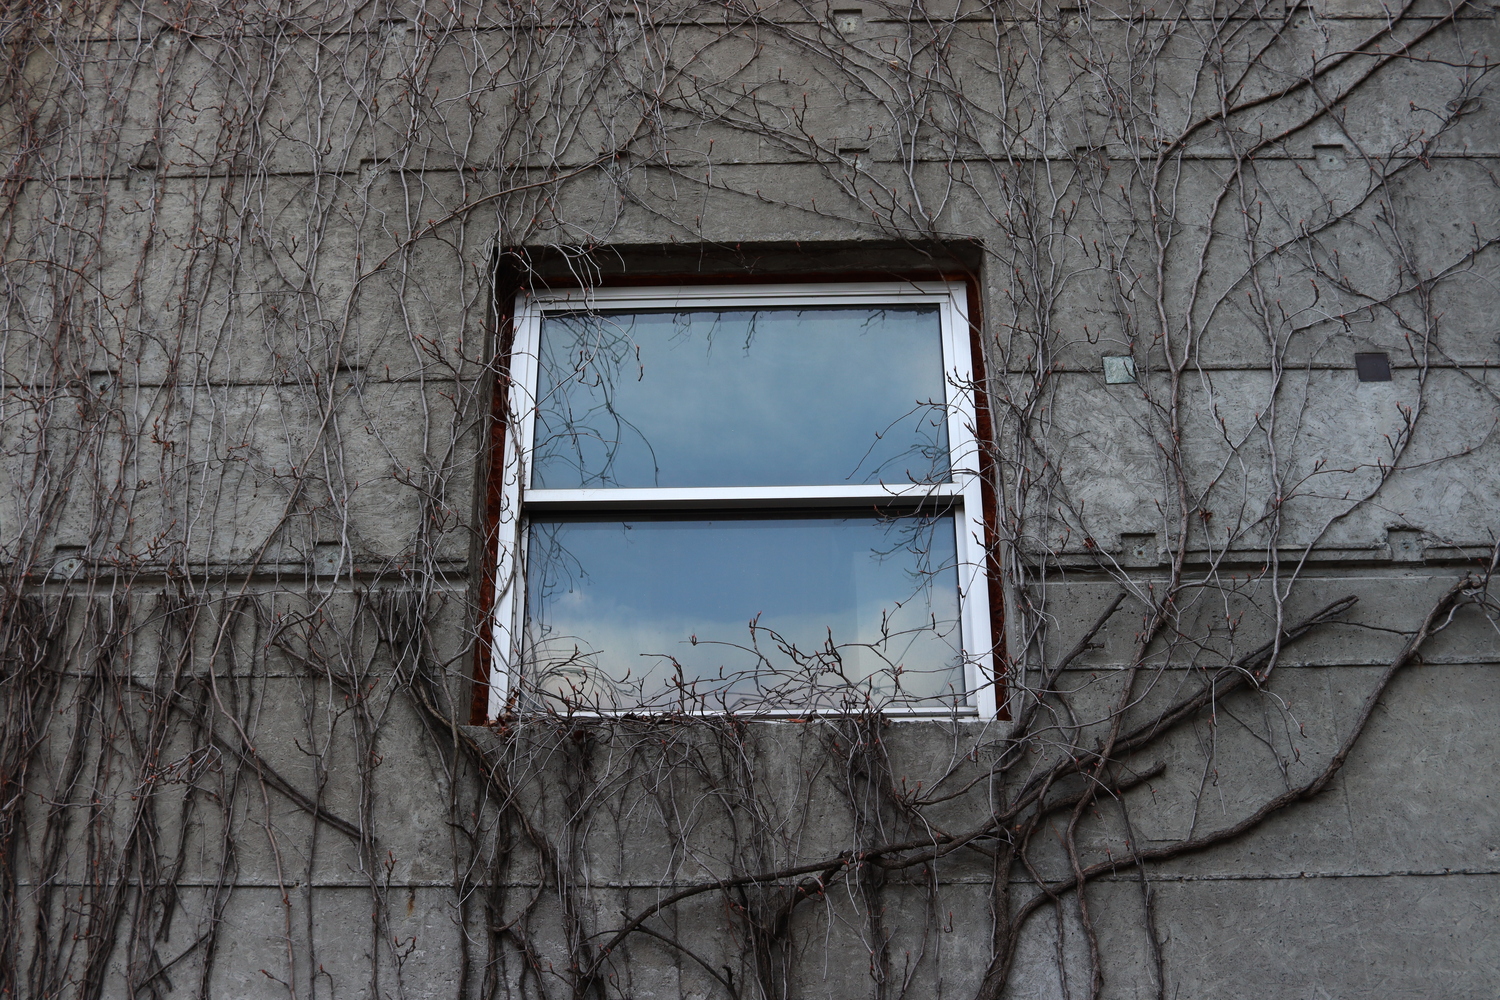 a square window
in the centre of a concrete wall
covered in vines
that haven't started growing leaves again yet.